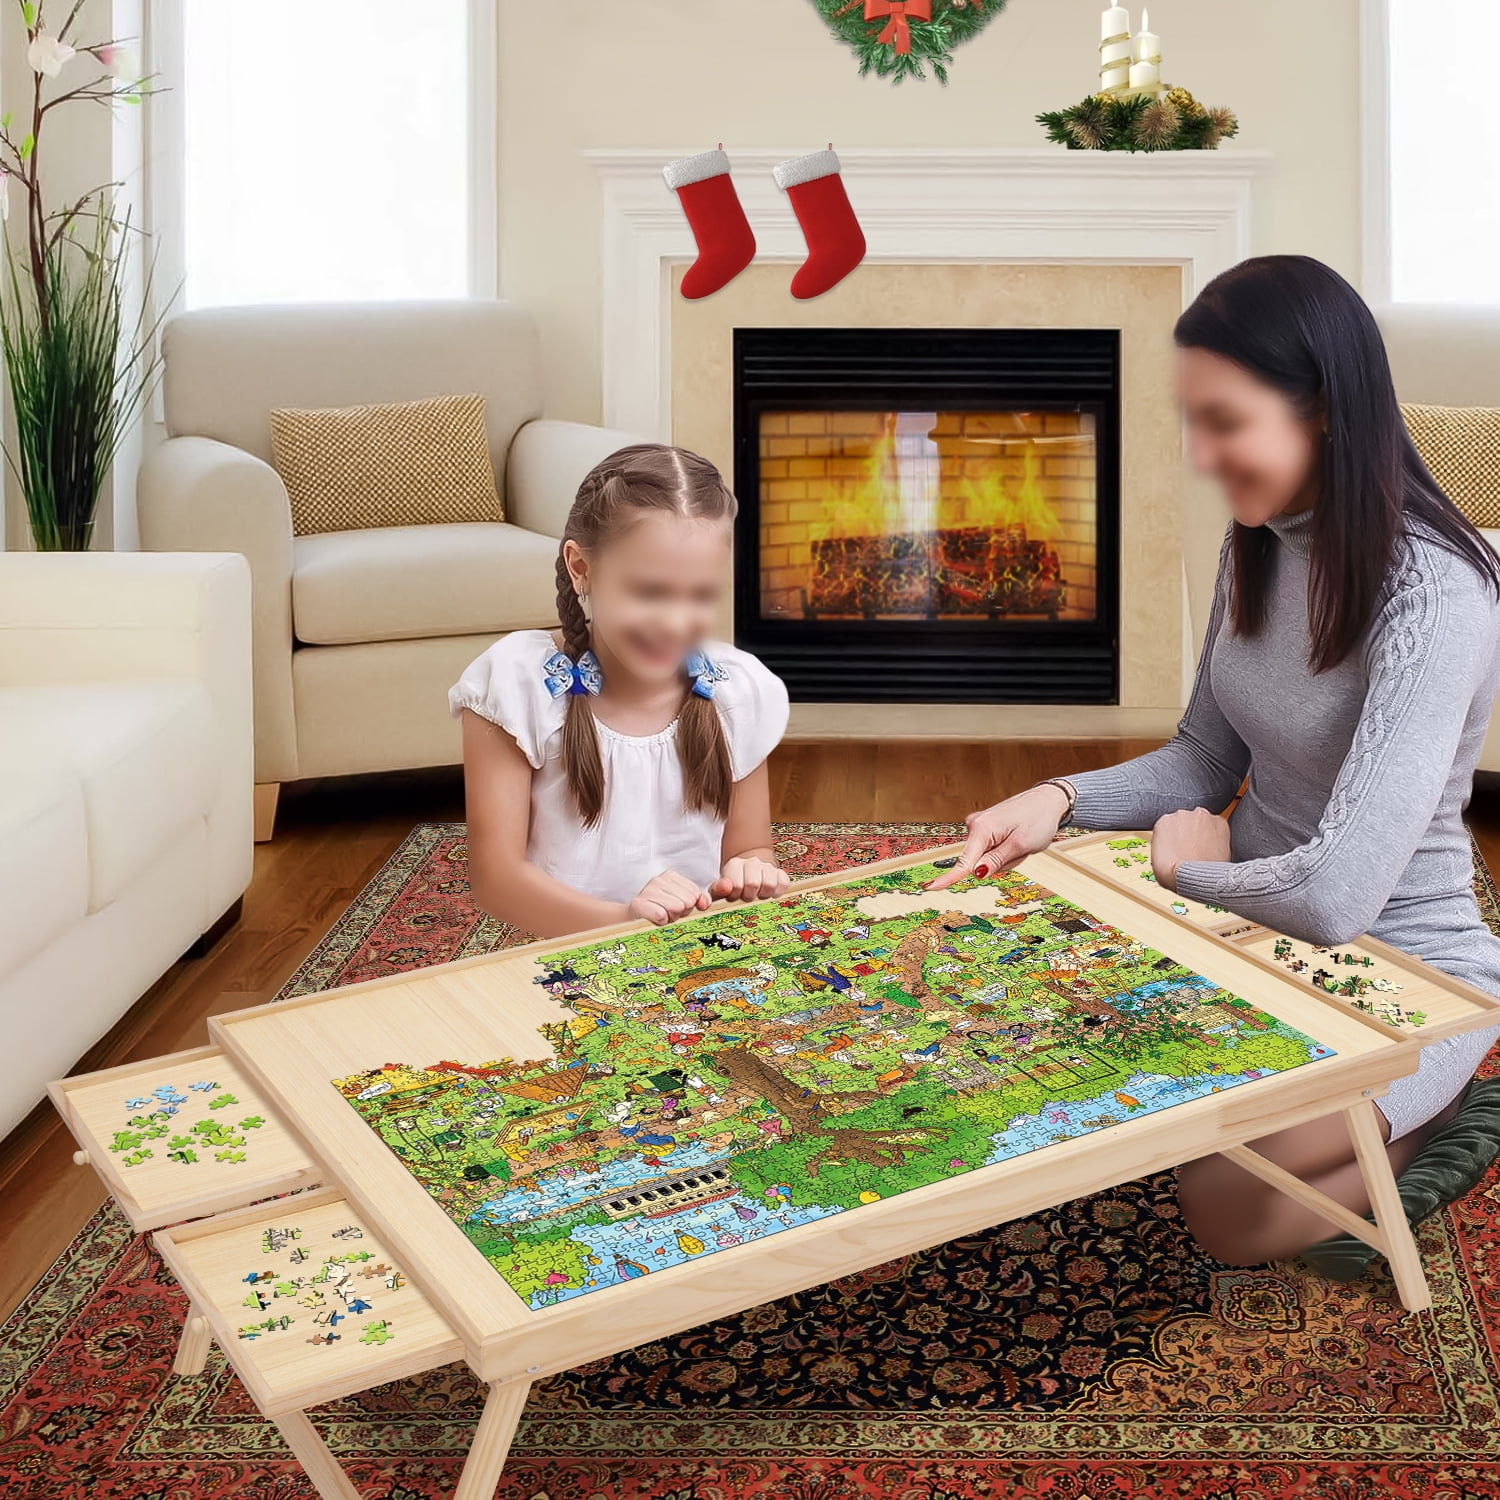 TEAKMAMA 1500 Piece Wooden Jigsaw Folding Puzzle Board, Puzzle Table with  Legs and Protective Cover, 34” X 26.3” Jigsaw Puzzle Board with 4 Drawers 